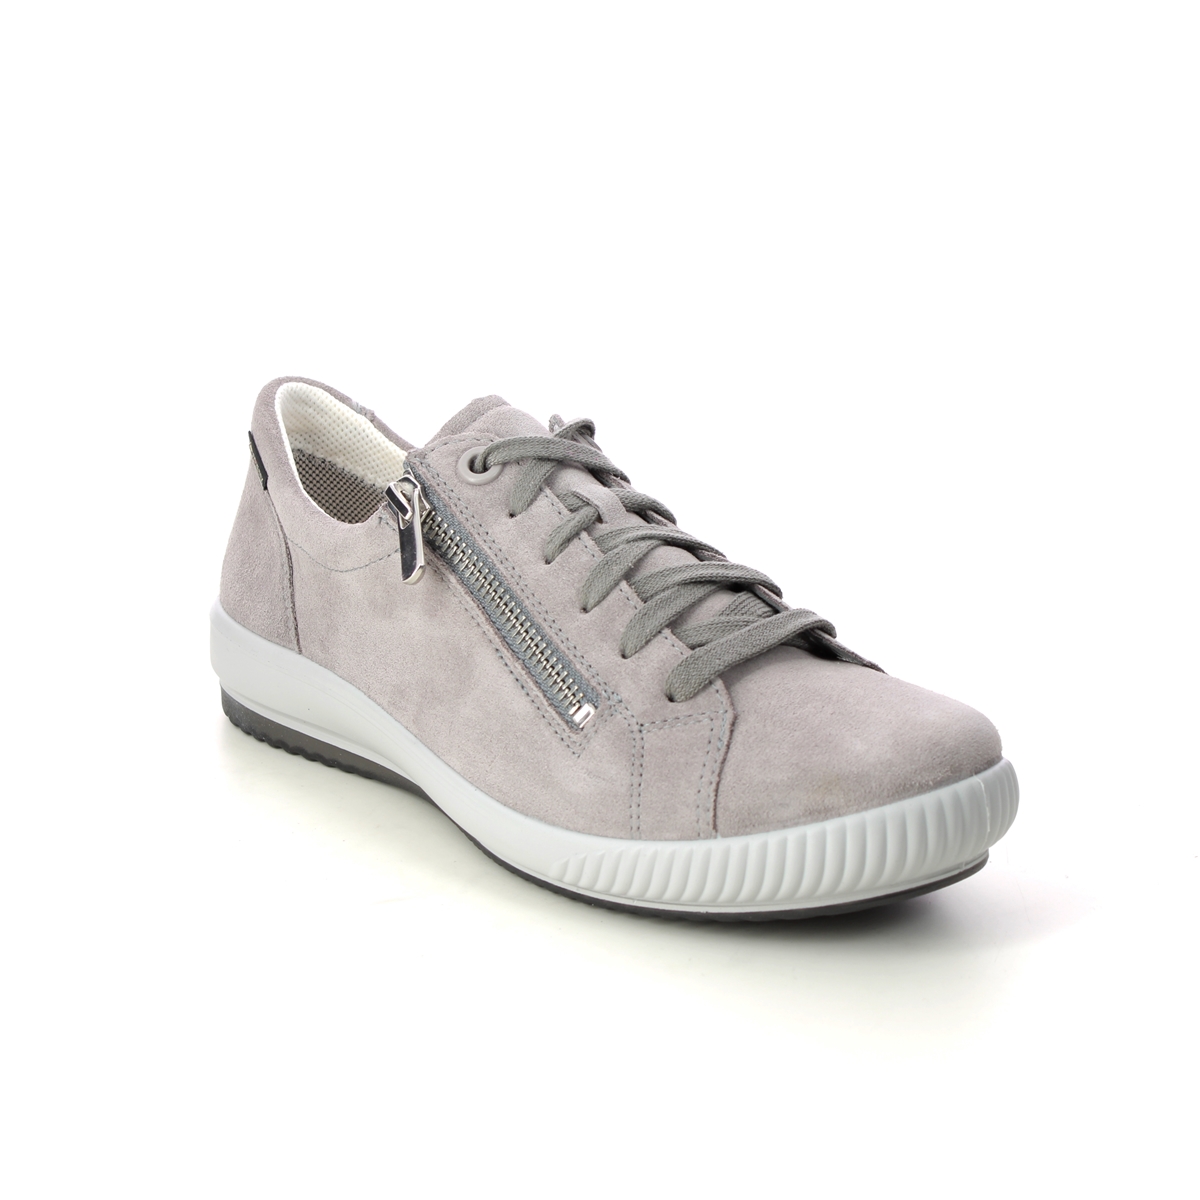 Legero Tanaro 5 Gtx Light Grey Suede Womens Lacing Shoes 2000219-2900 In Size 7 In Plain Light Grey Suede